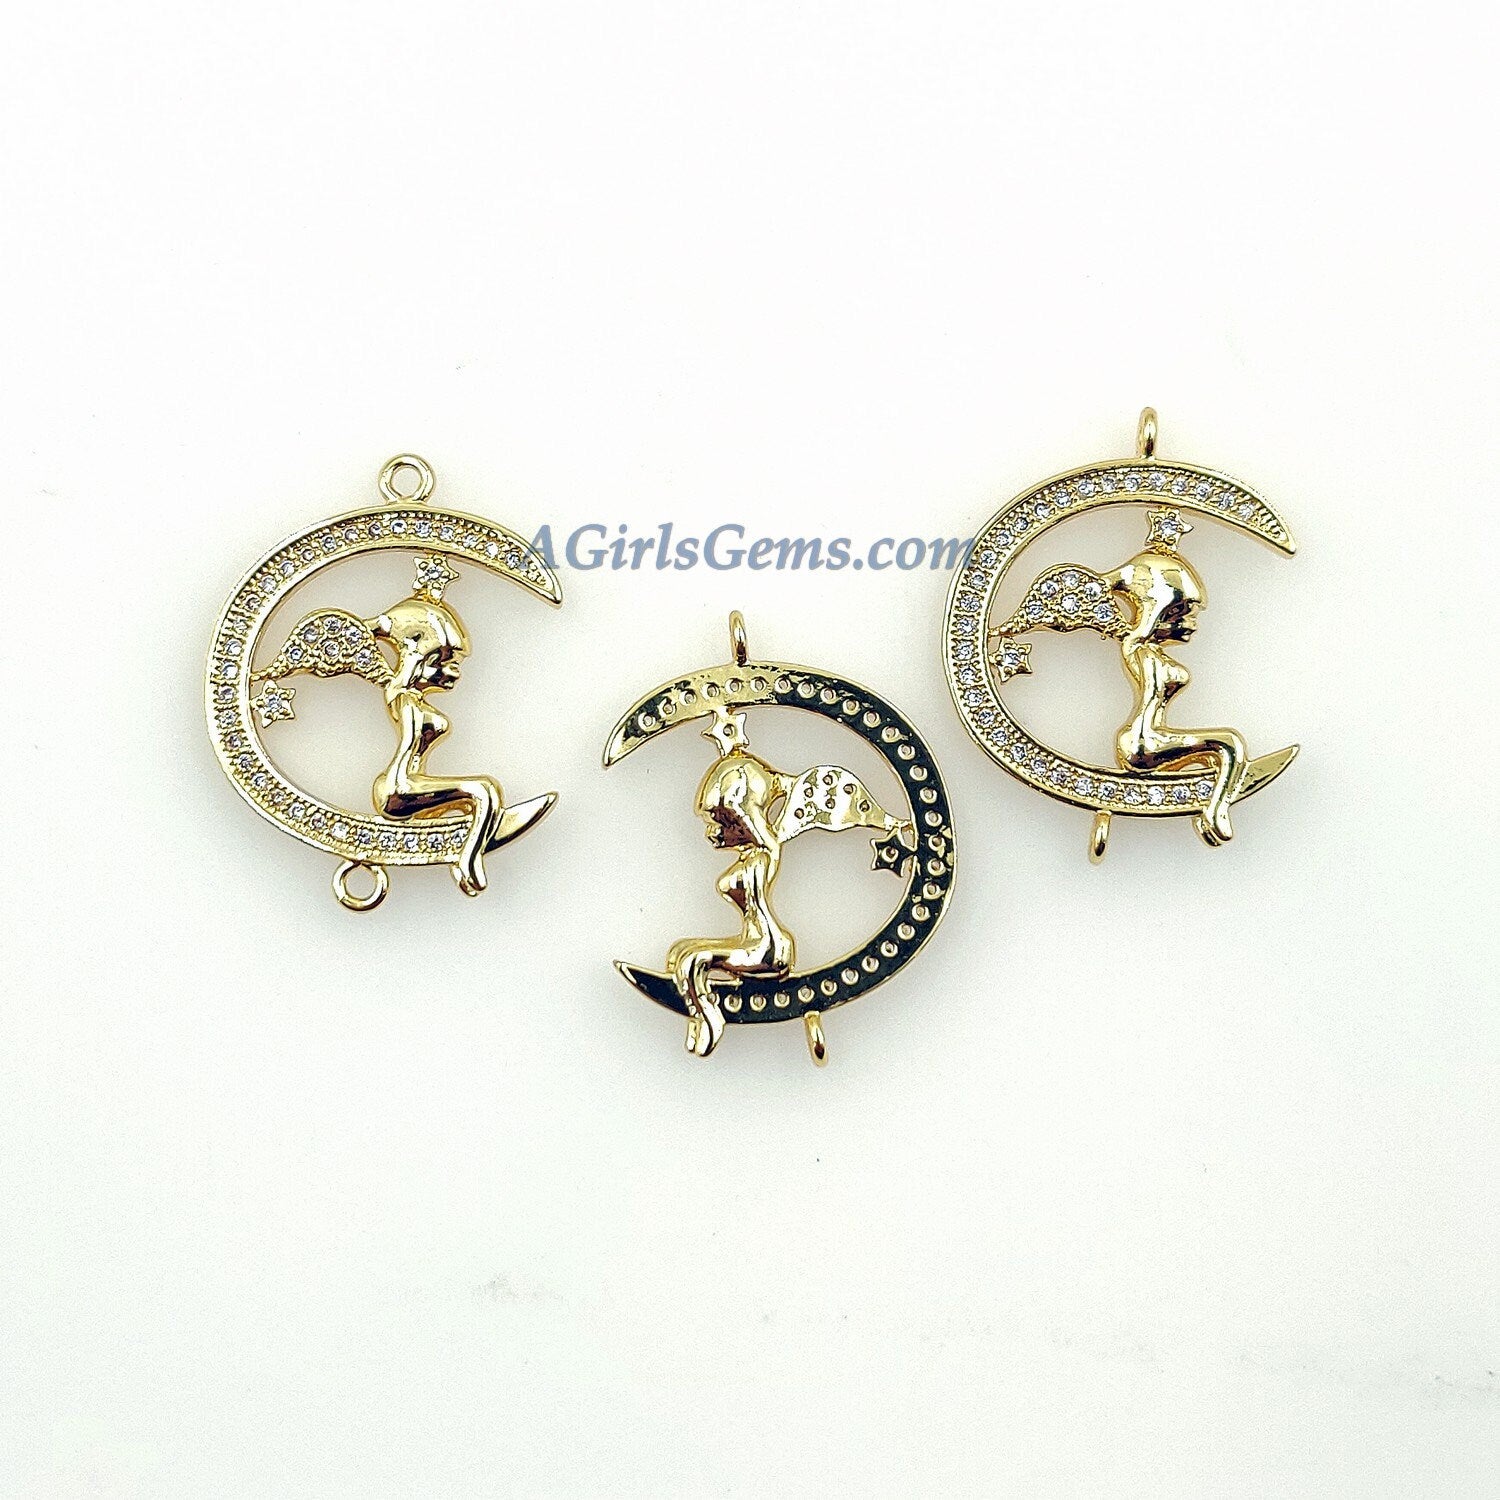 CZ Micro Pave Angel Wings Connector, Crescent Moon Linking Charms, 18 K Gold Plated, Sexy Girls Pin Up Mens Jewelry, His and Her/Necklaces